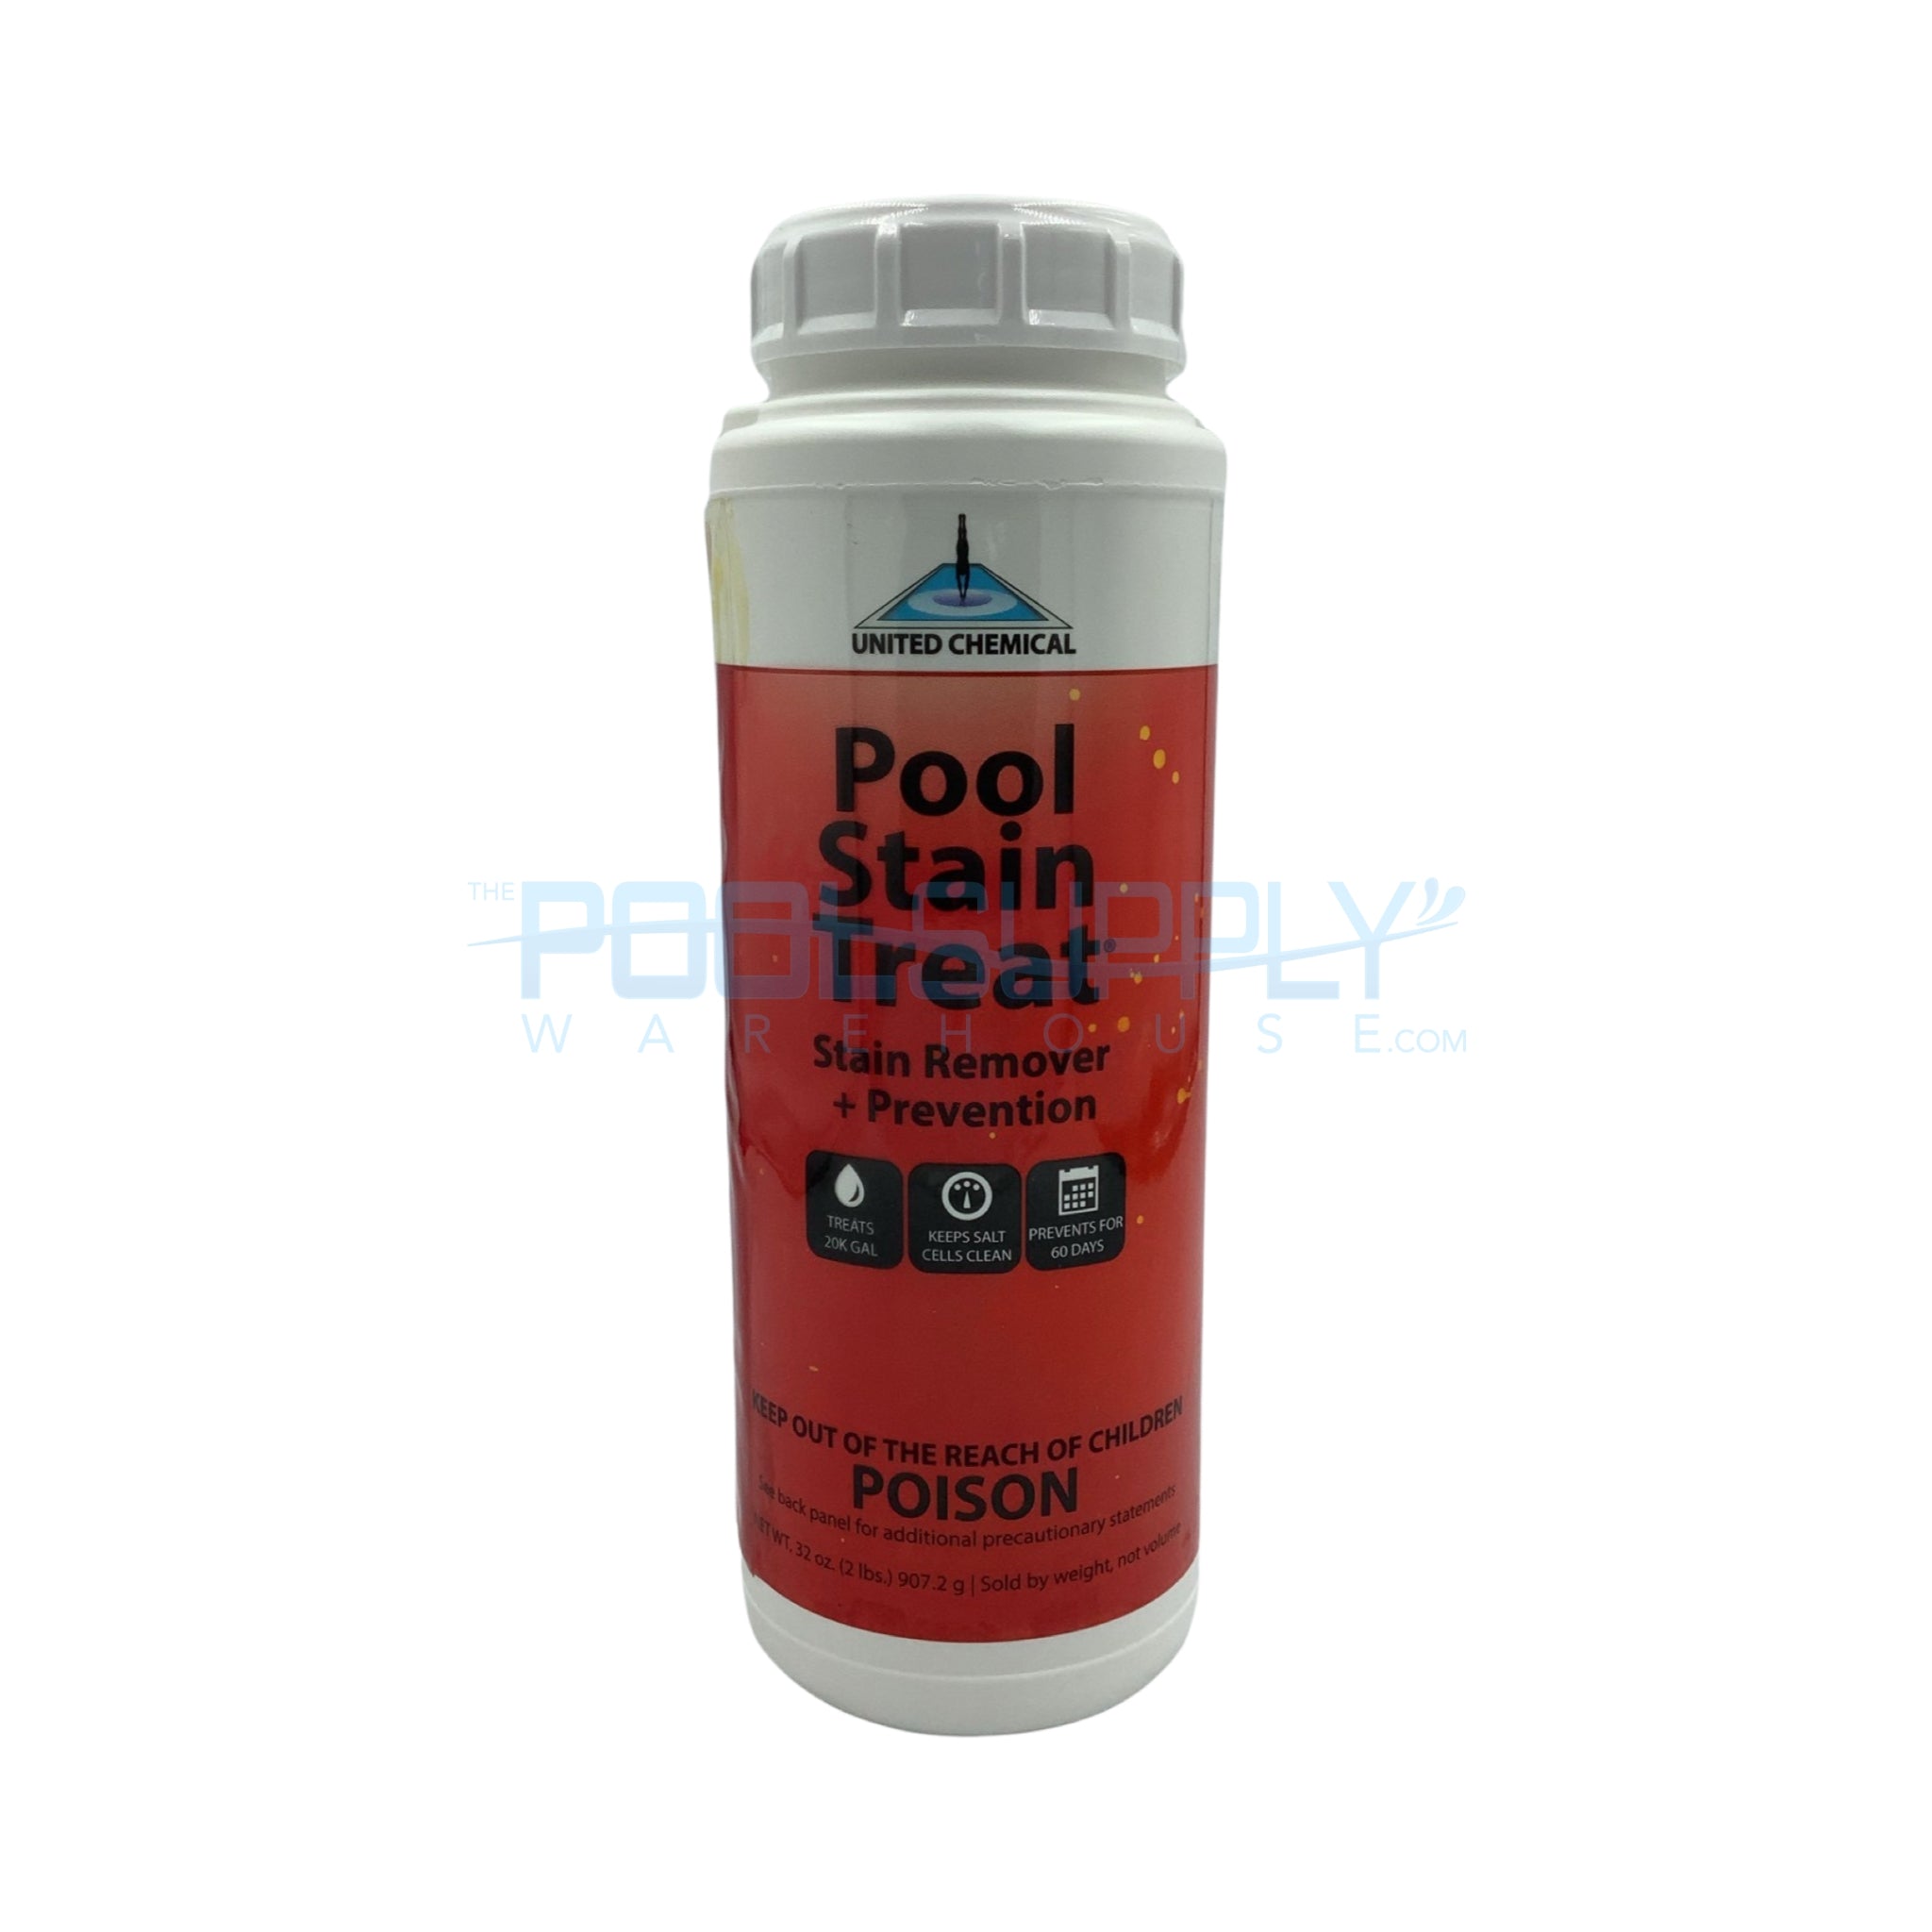 United Chemical Pool Stain Treat - 2 Lb - PST-C12 - The Pool Supply Warehouse